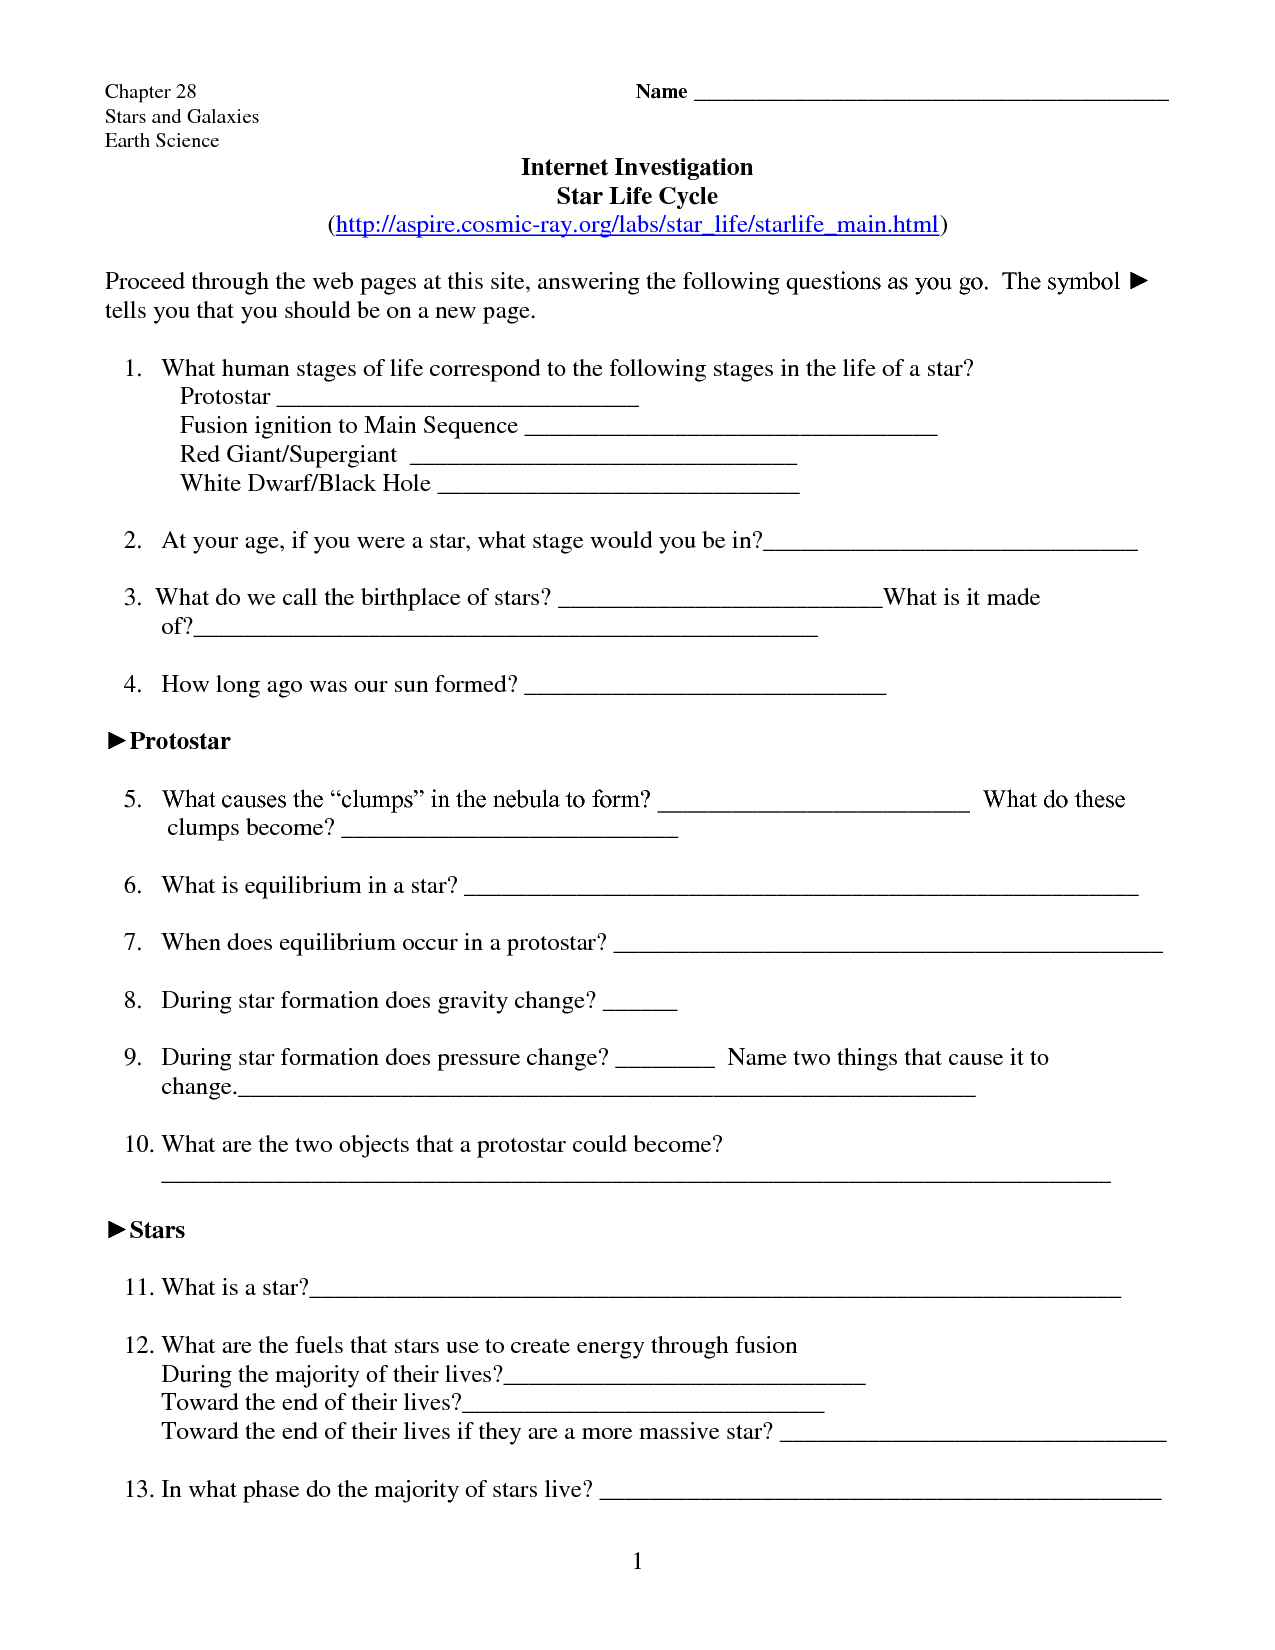 13 Best Images of Stars And Galaxies Worksheet Answers Star Life Cycle Worksheet Answers